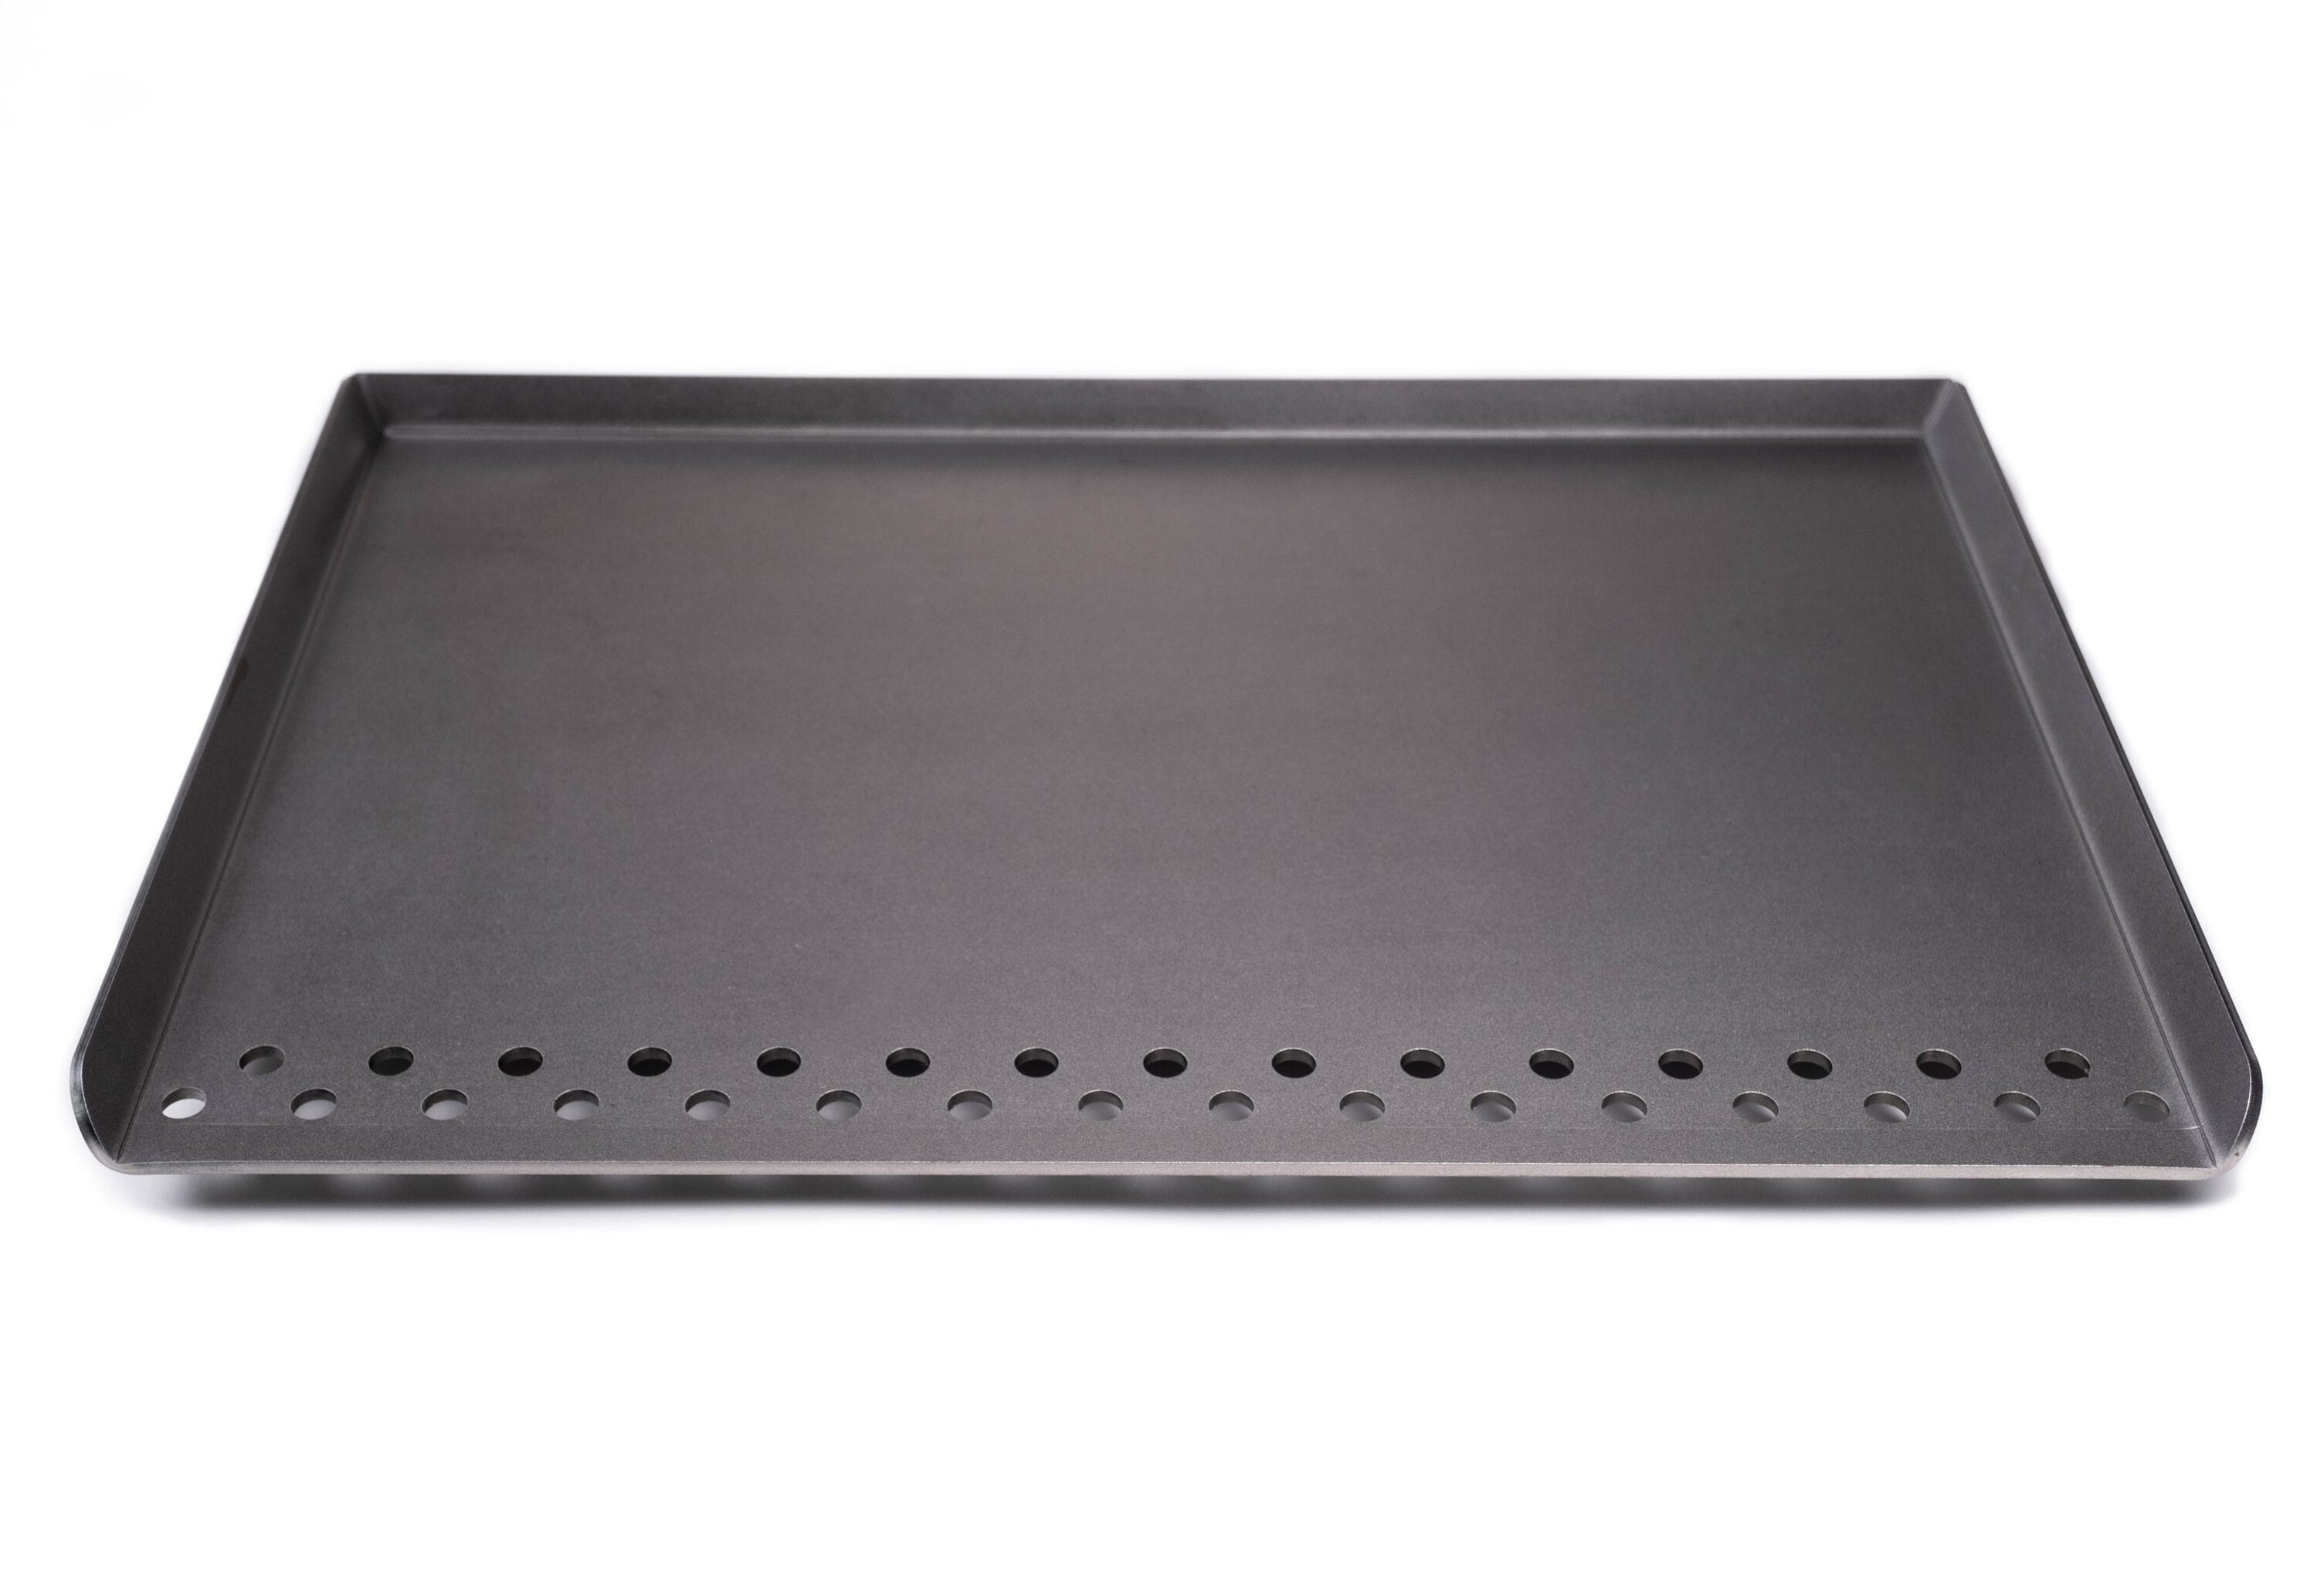 Complete Combo - Flat Top For Outdoor Grill - Steelmade